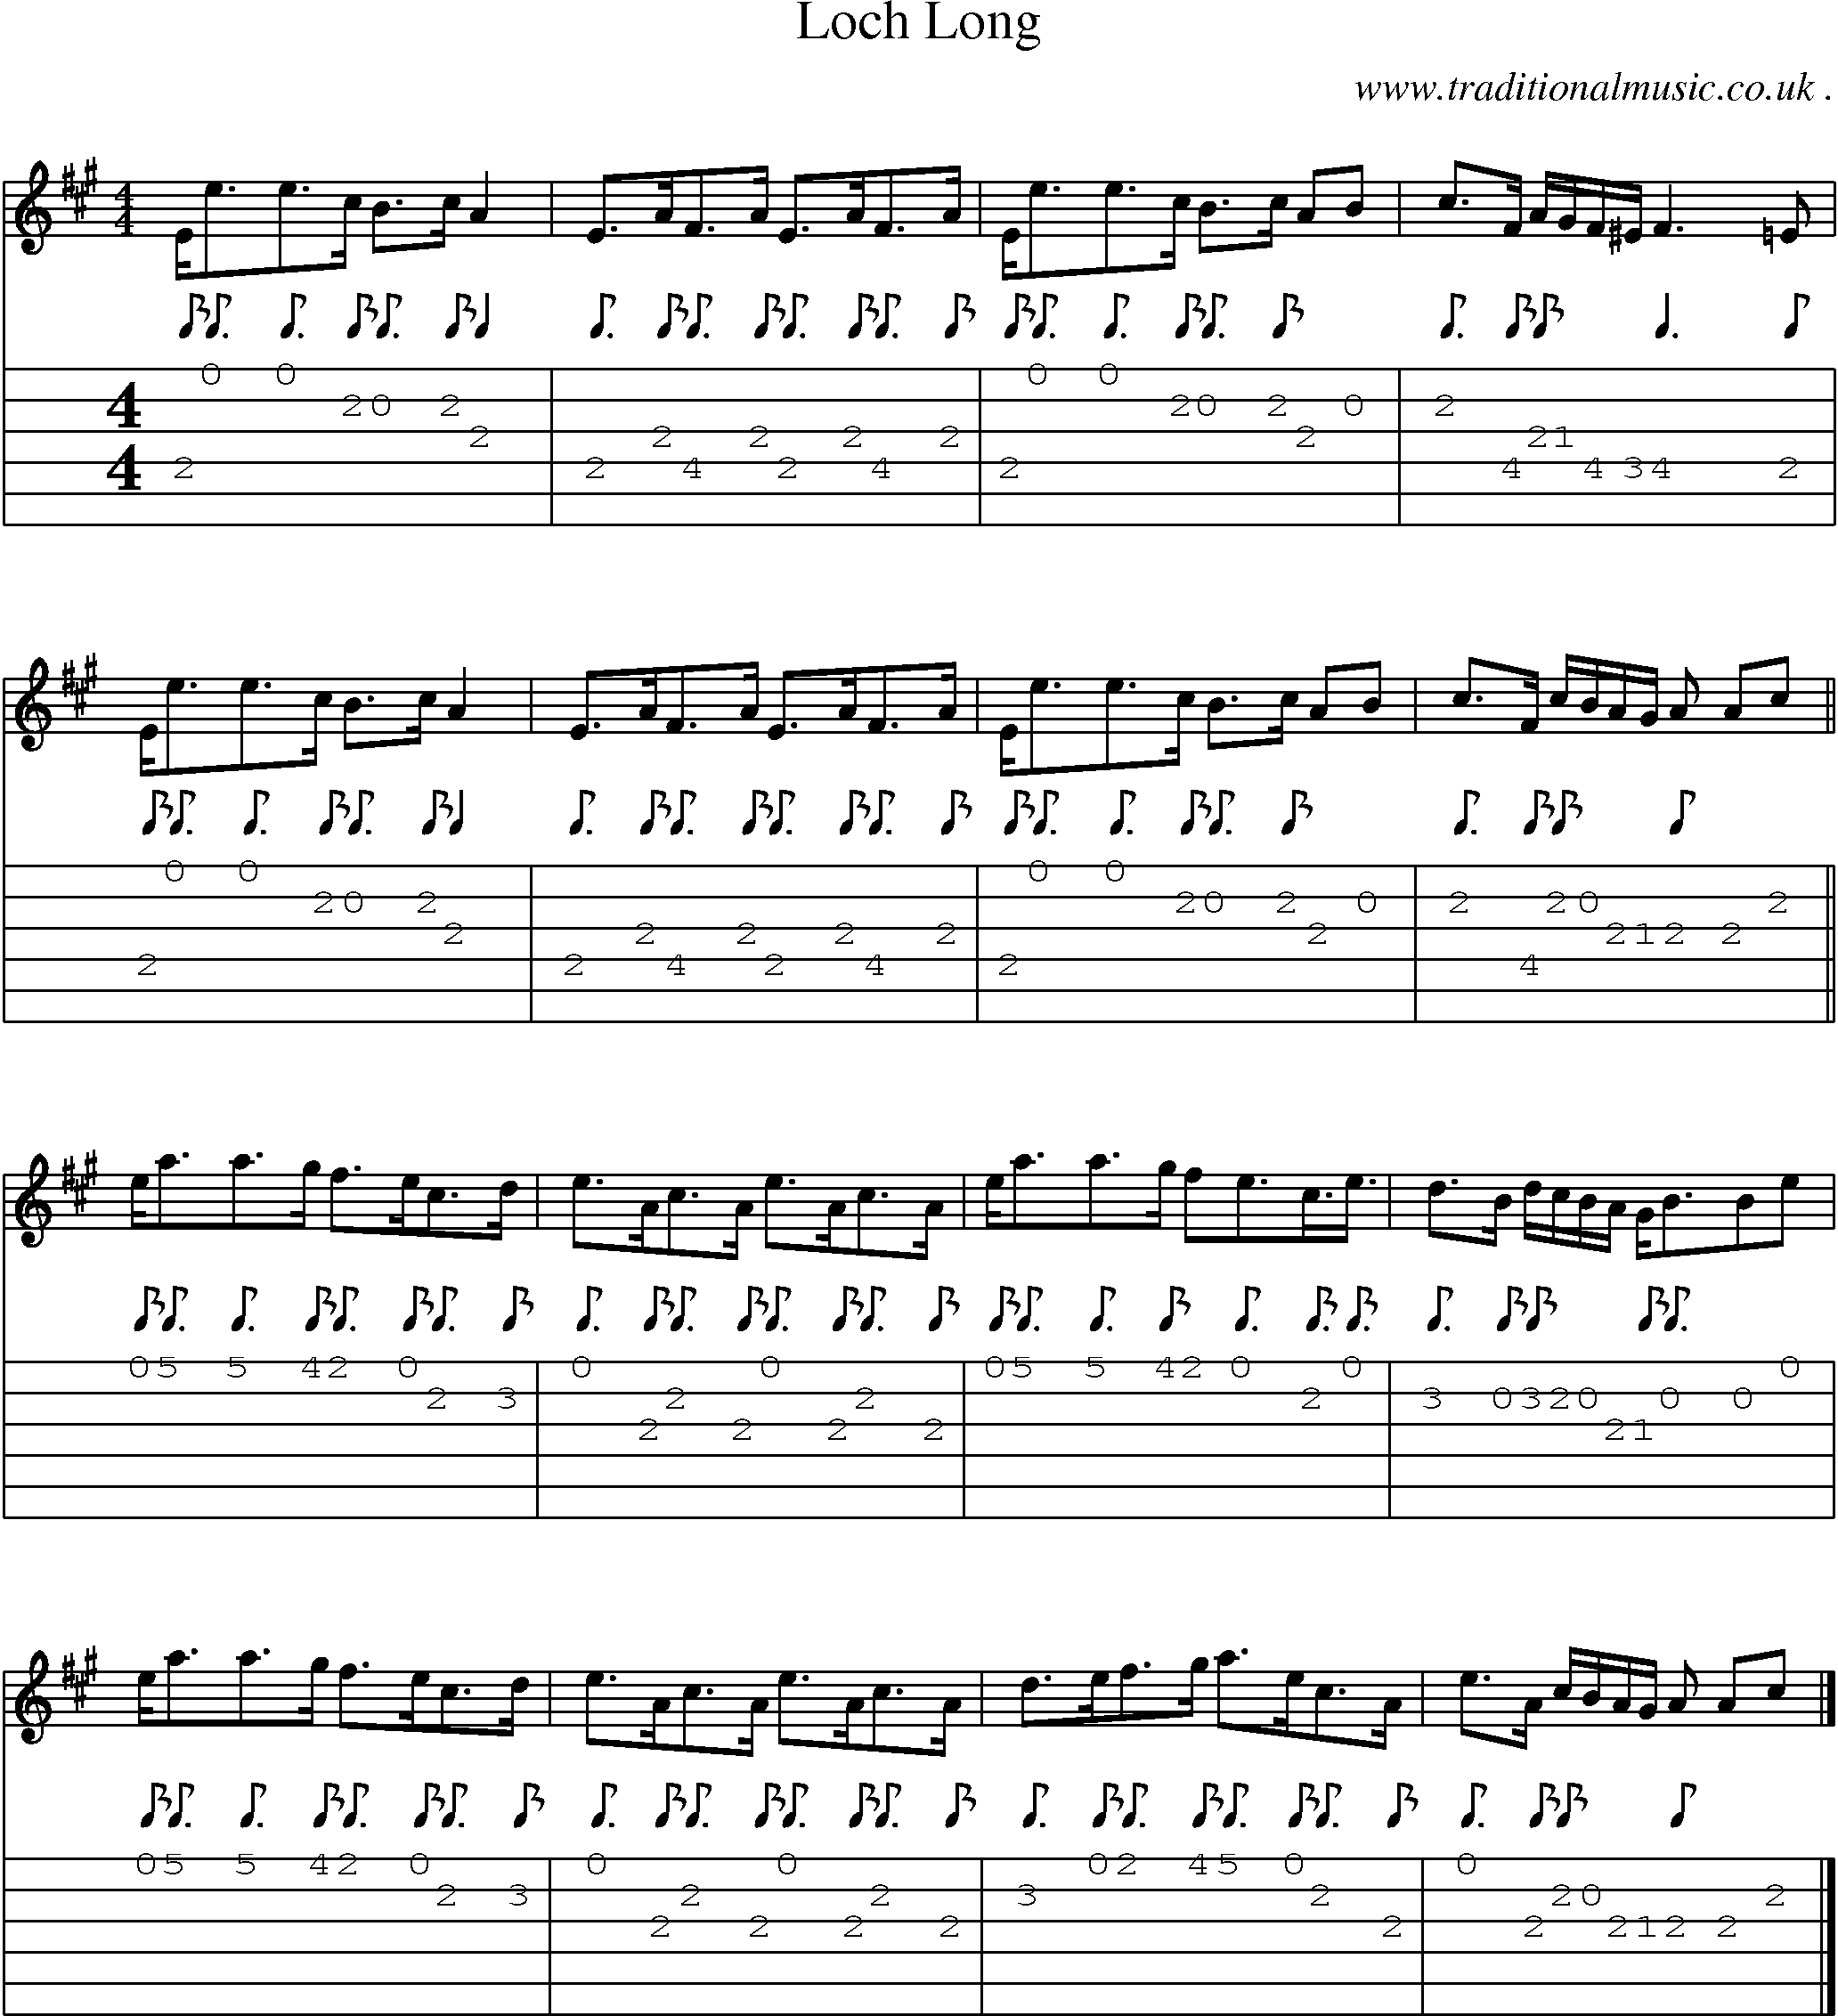 Sheet-music  score, Chords and Guitar Tabs for Loch Long